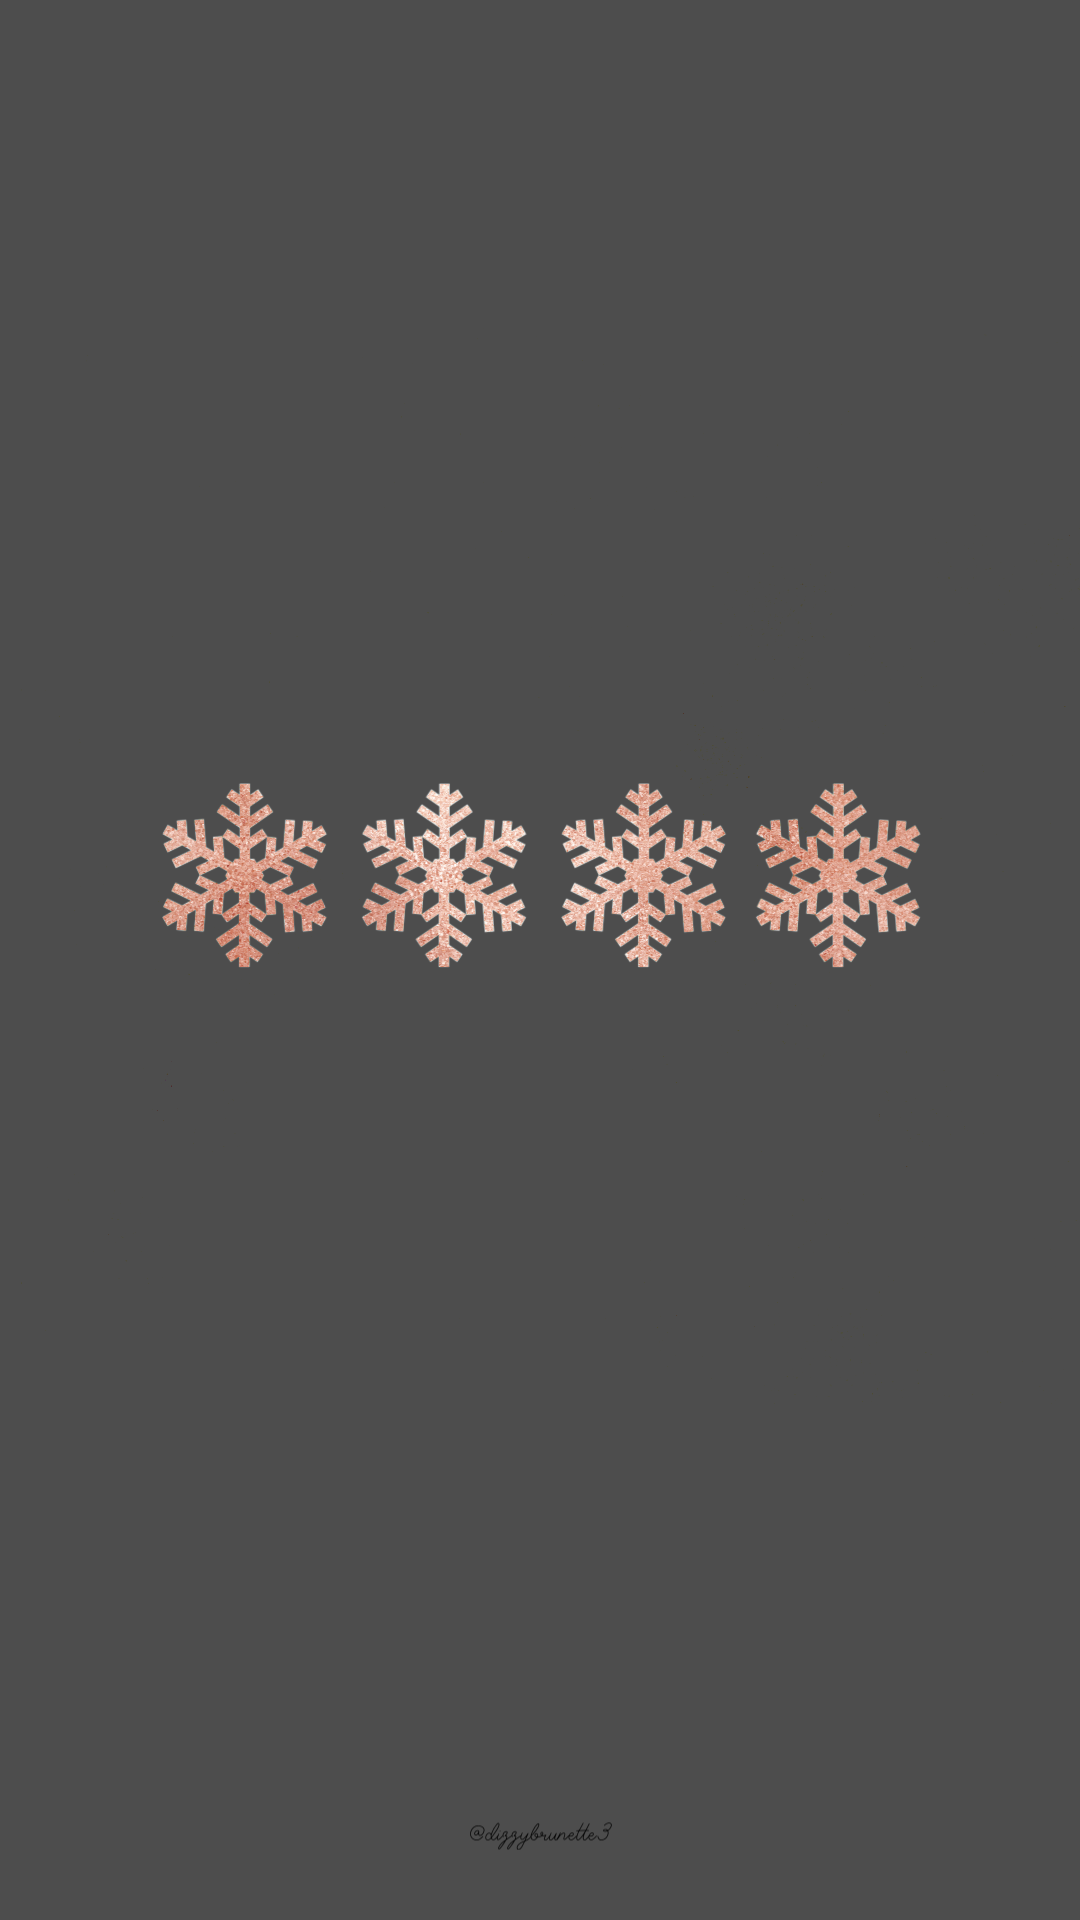 A Grey Background With Snowflakes On It